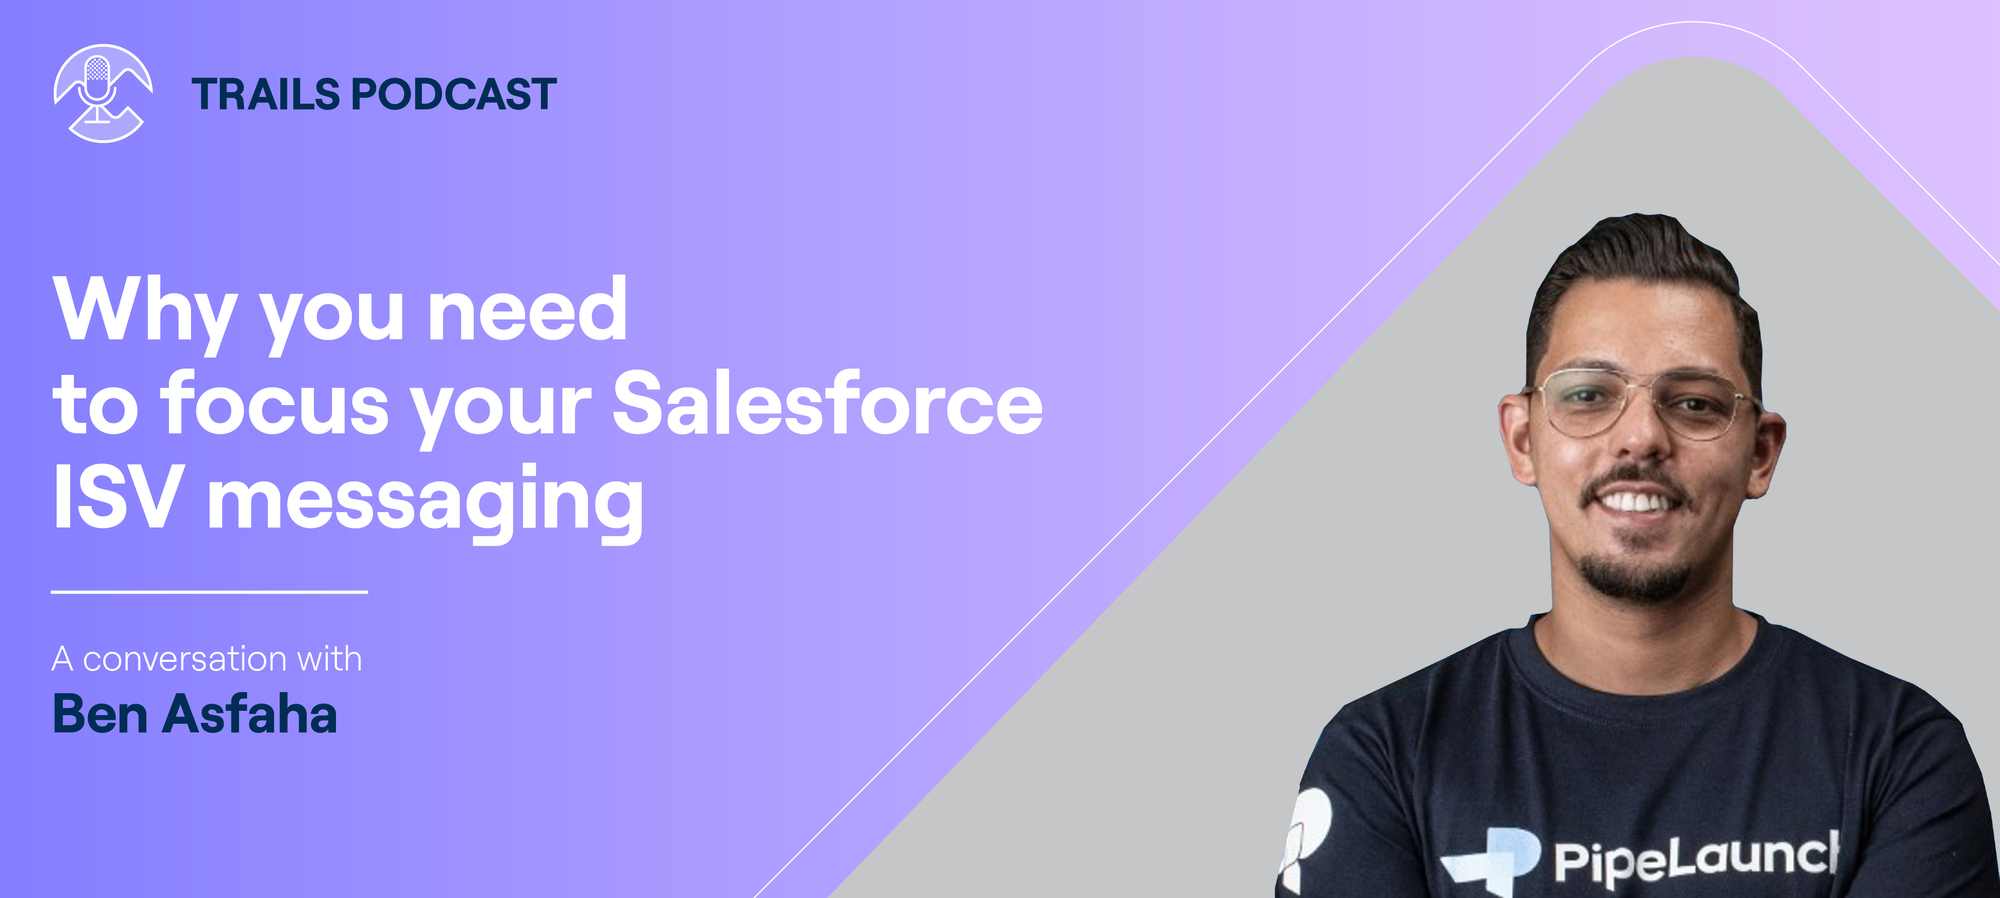 Why you need to focus your Salesforce ISV messaging  (Trails Podcast episode #7 with Ben Asfaha)